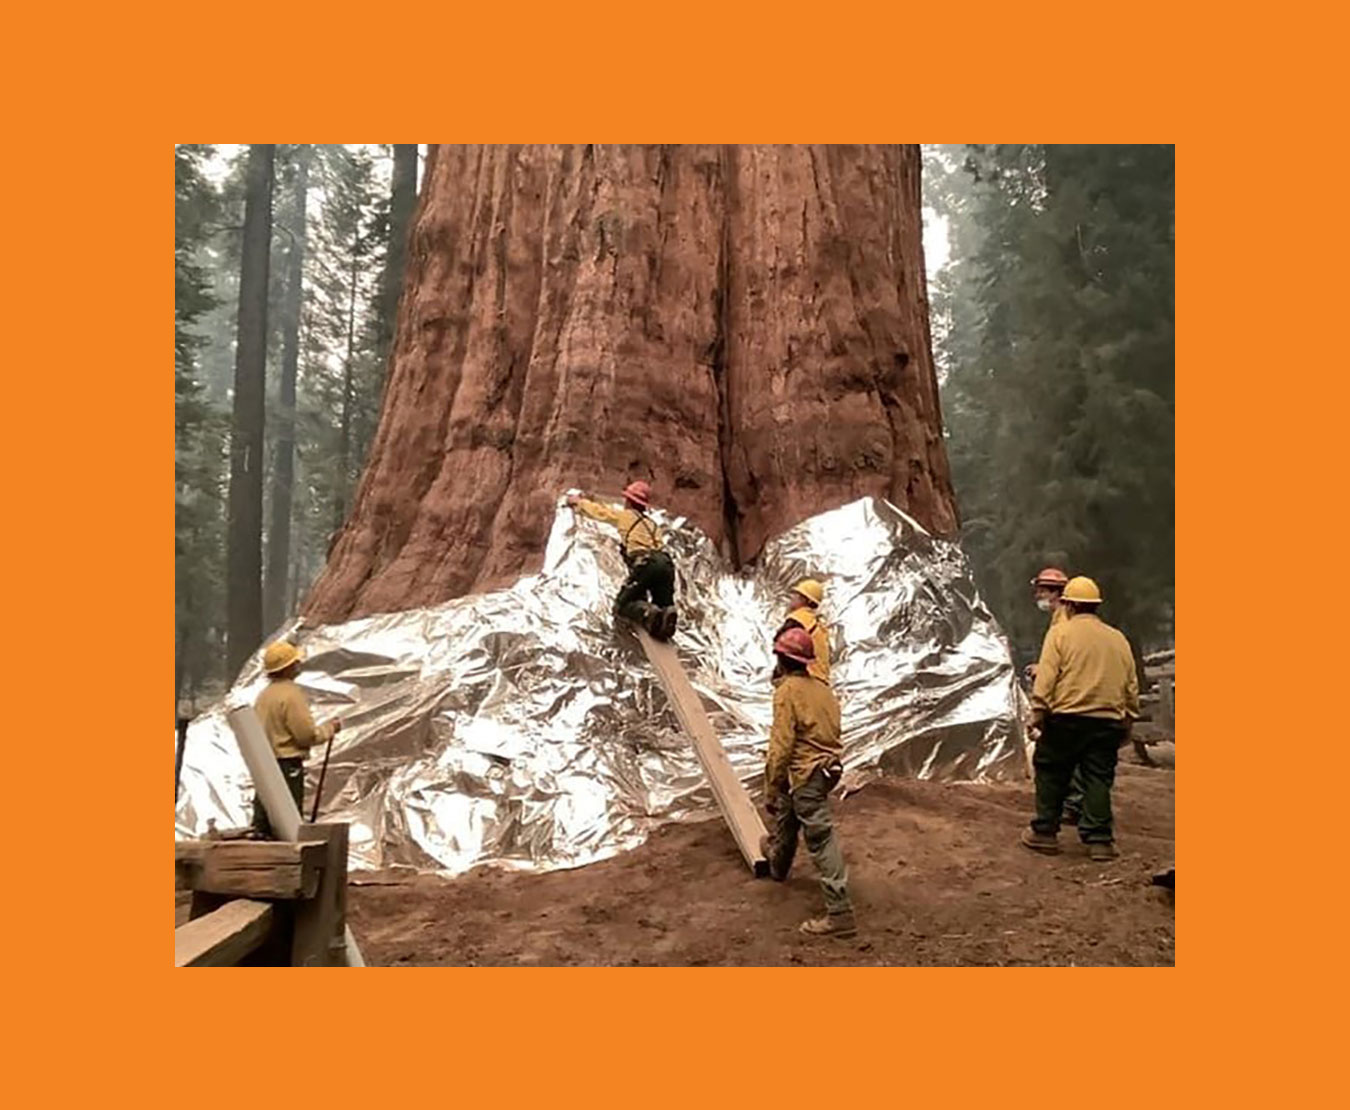 Firefighters use wooden supports to climb higher around the base of the General Sherman tree and wrap protective foil around the tree's  lower 10-15 feet. This material, also used to protect buildings, minimized the likelihood fire would ignite exposed areas, like old fire scars.